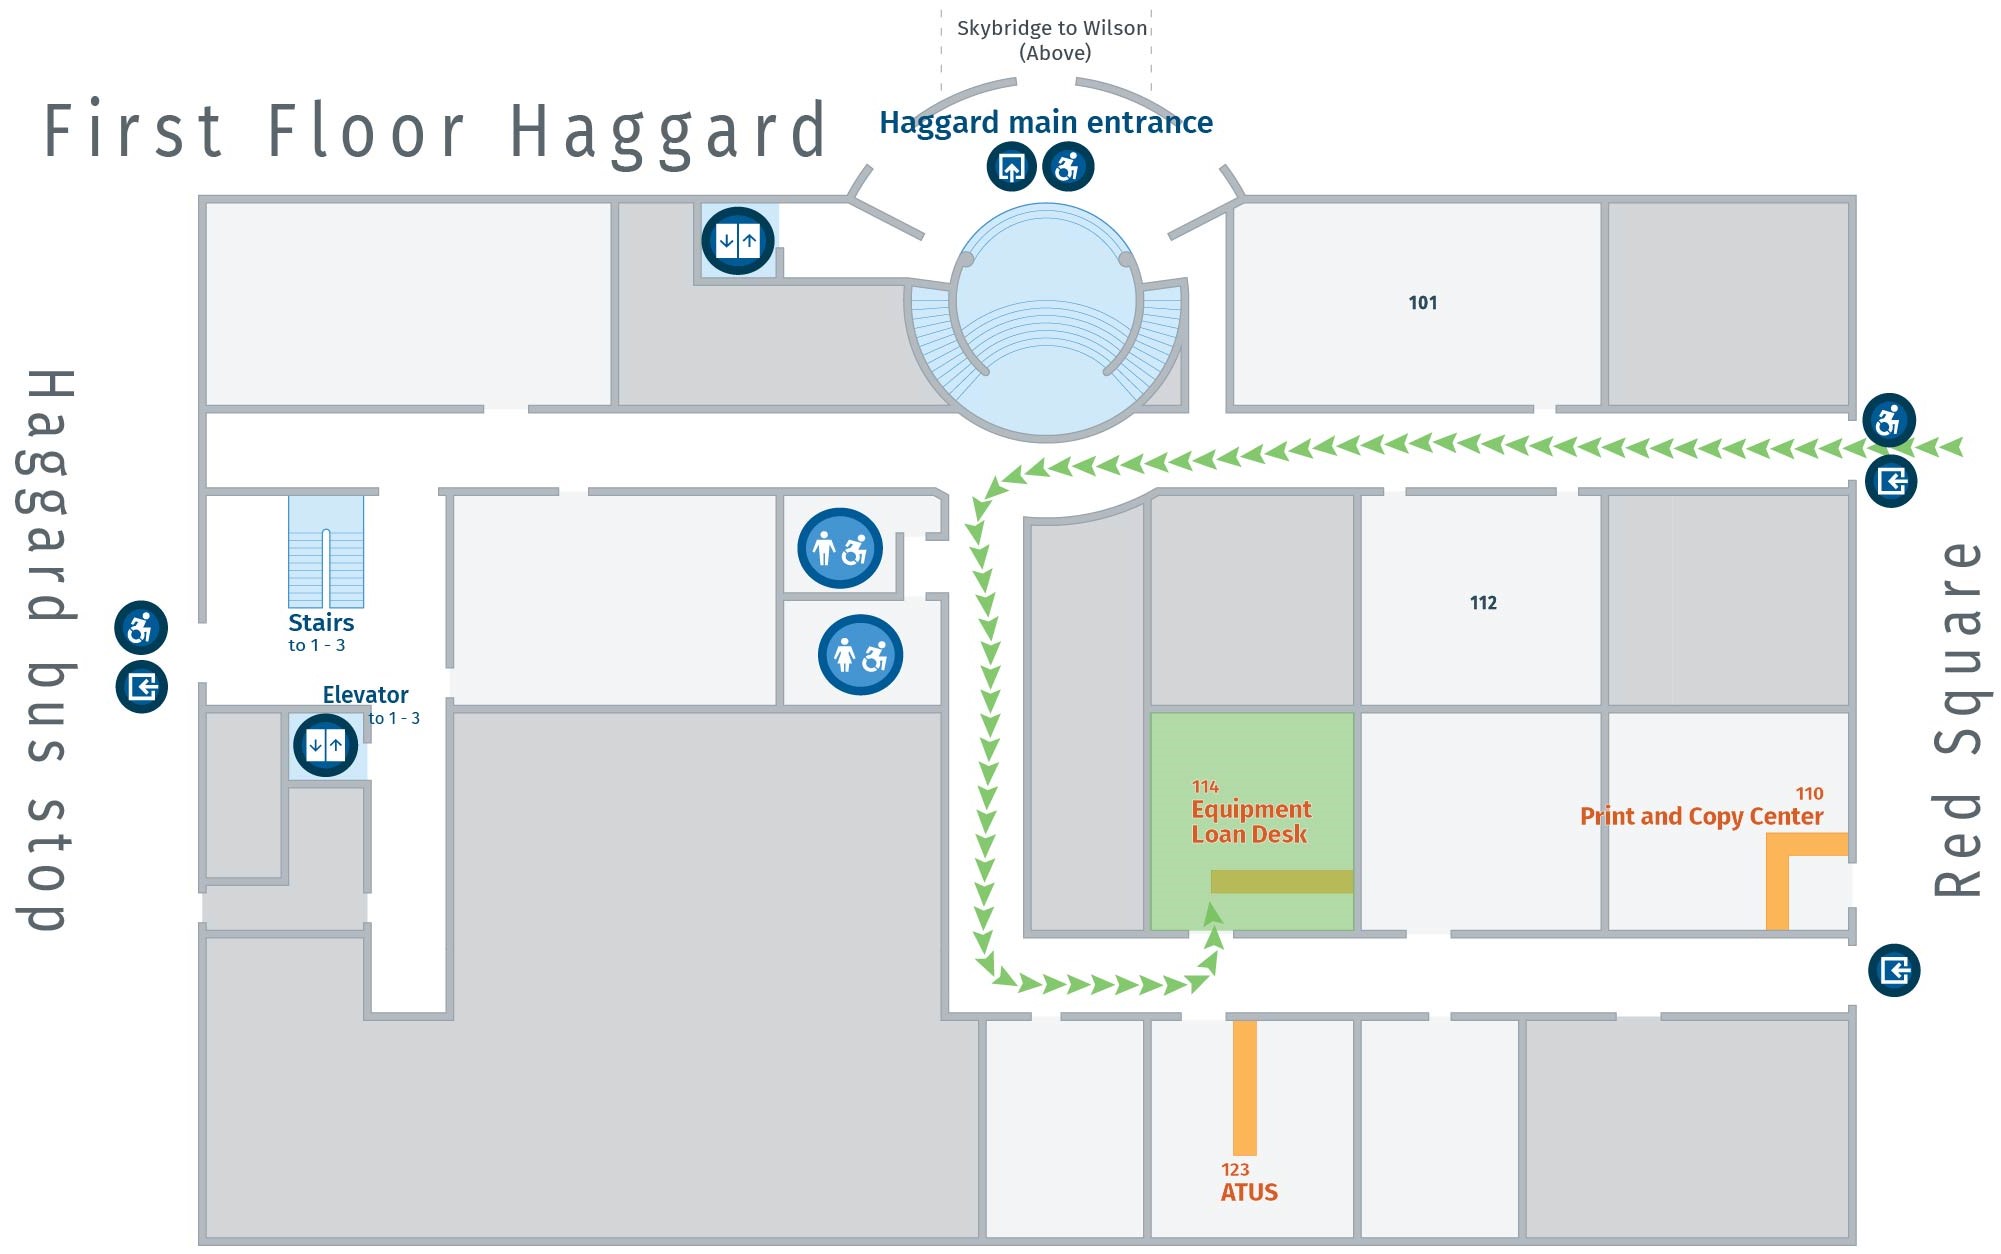 Floor plan, first floor of Haggard with accessible path to Equipment Loan Desk.